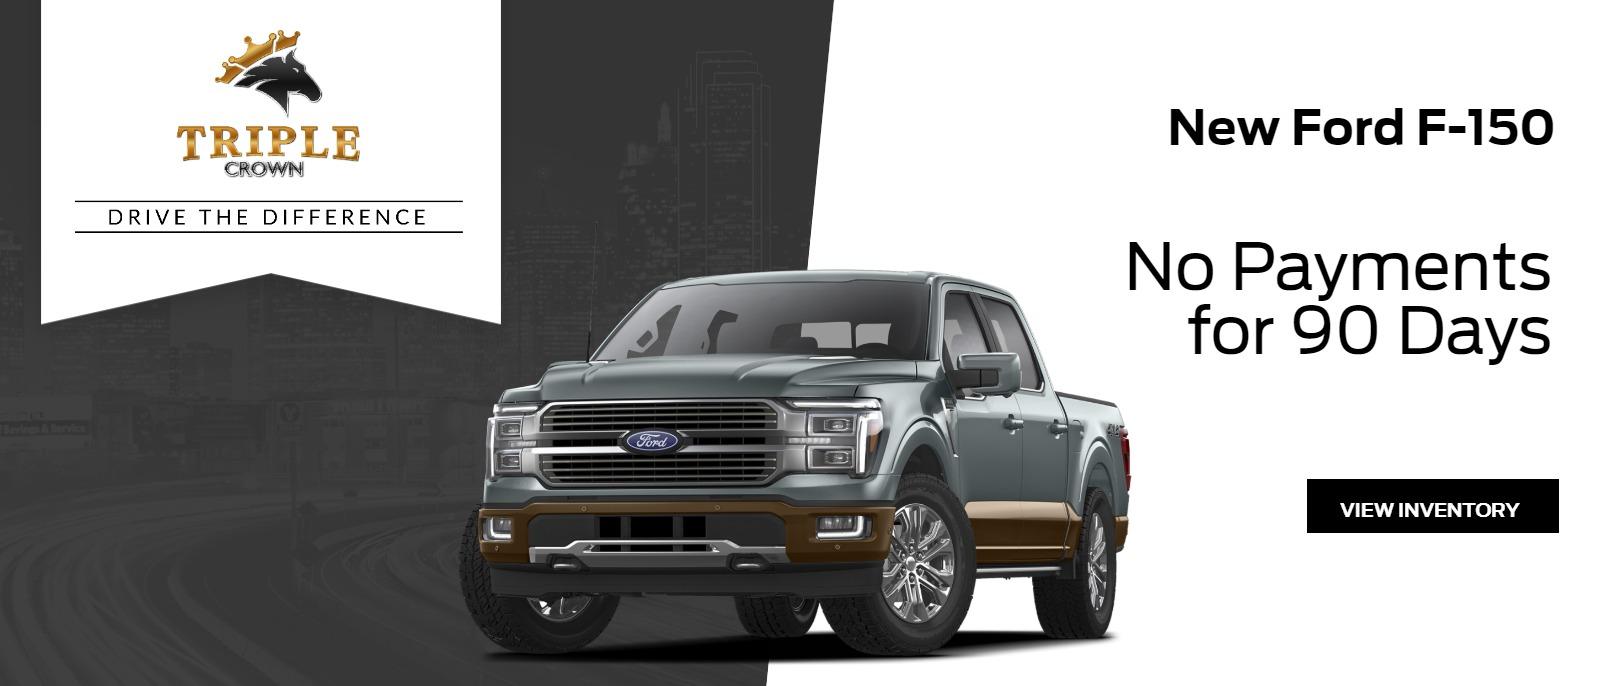 Triple Crown F-150 0% for 72 Months plus no payments for 90 days